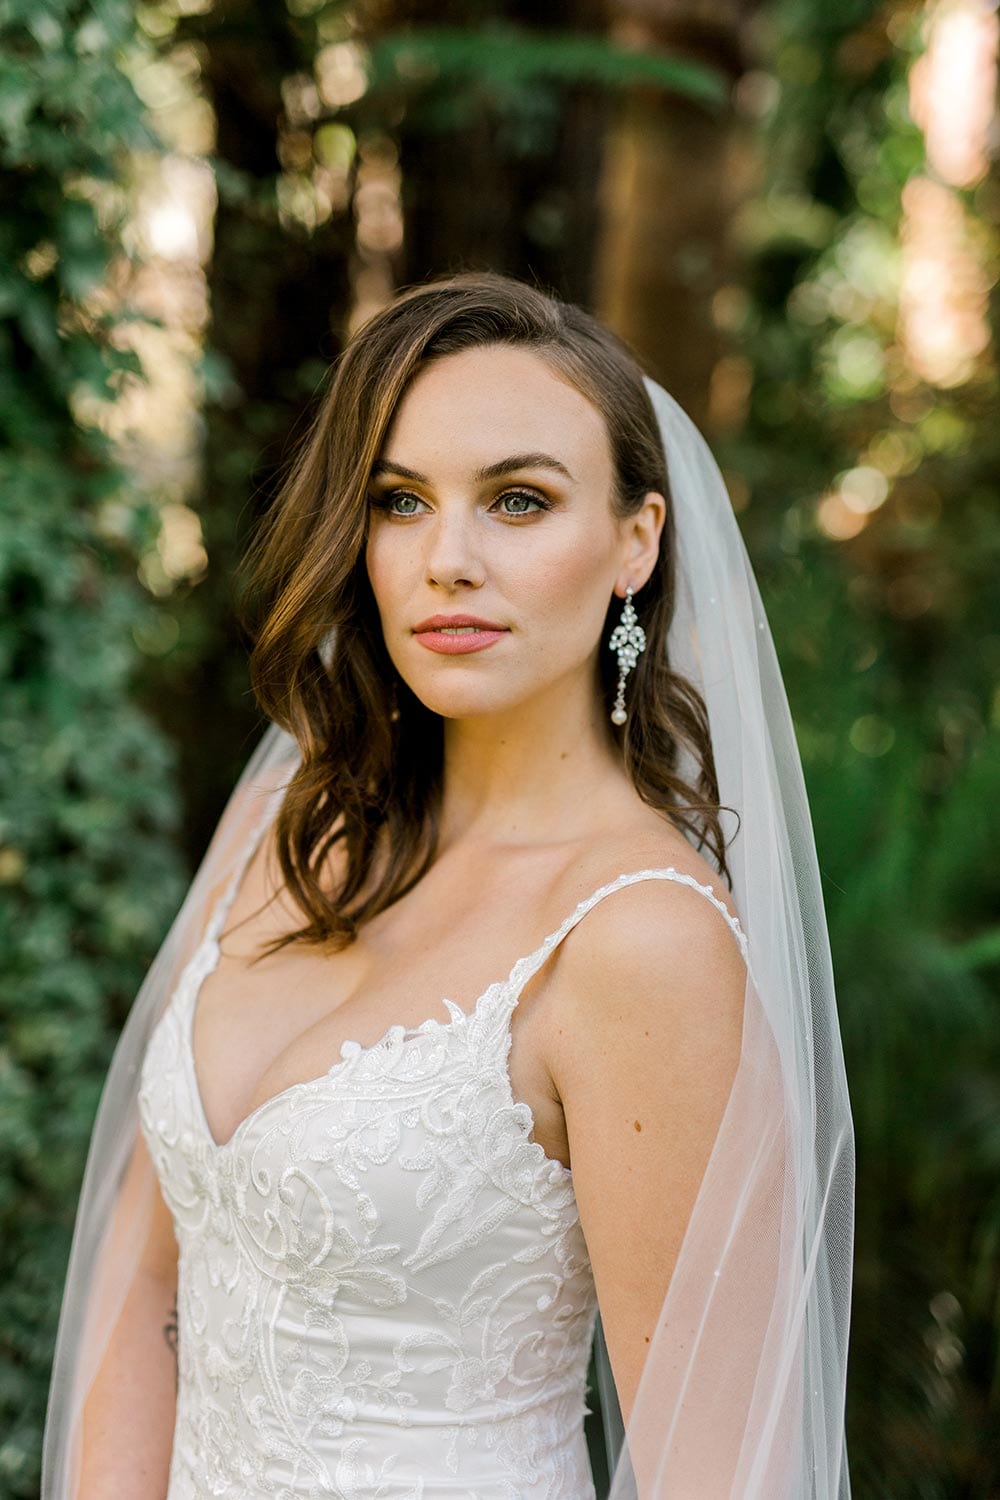 Sahara Wedding Dress from Vinka Design. Stunning fitted lace wedding gown. Lightly-beaded floral lace highlights the ivory stretch satin base. Sweetheart neckline & low back with beautiful lace detail. Front of dress with neckline. Photographed in landscaped gardens.